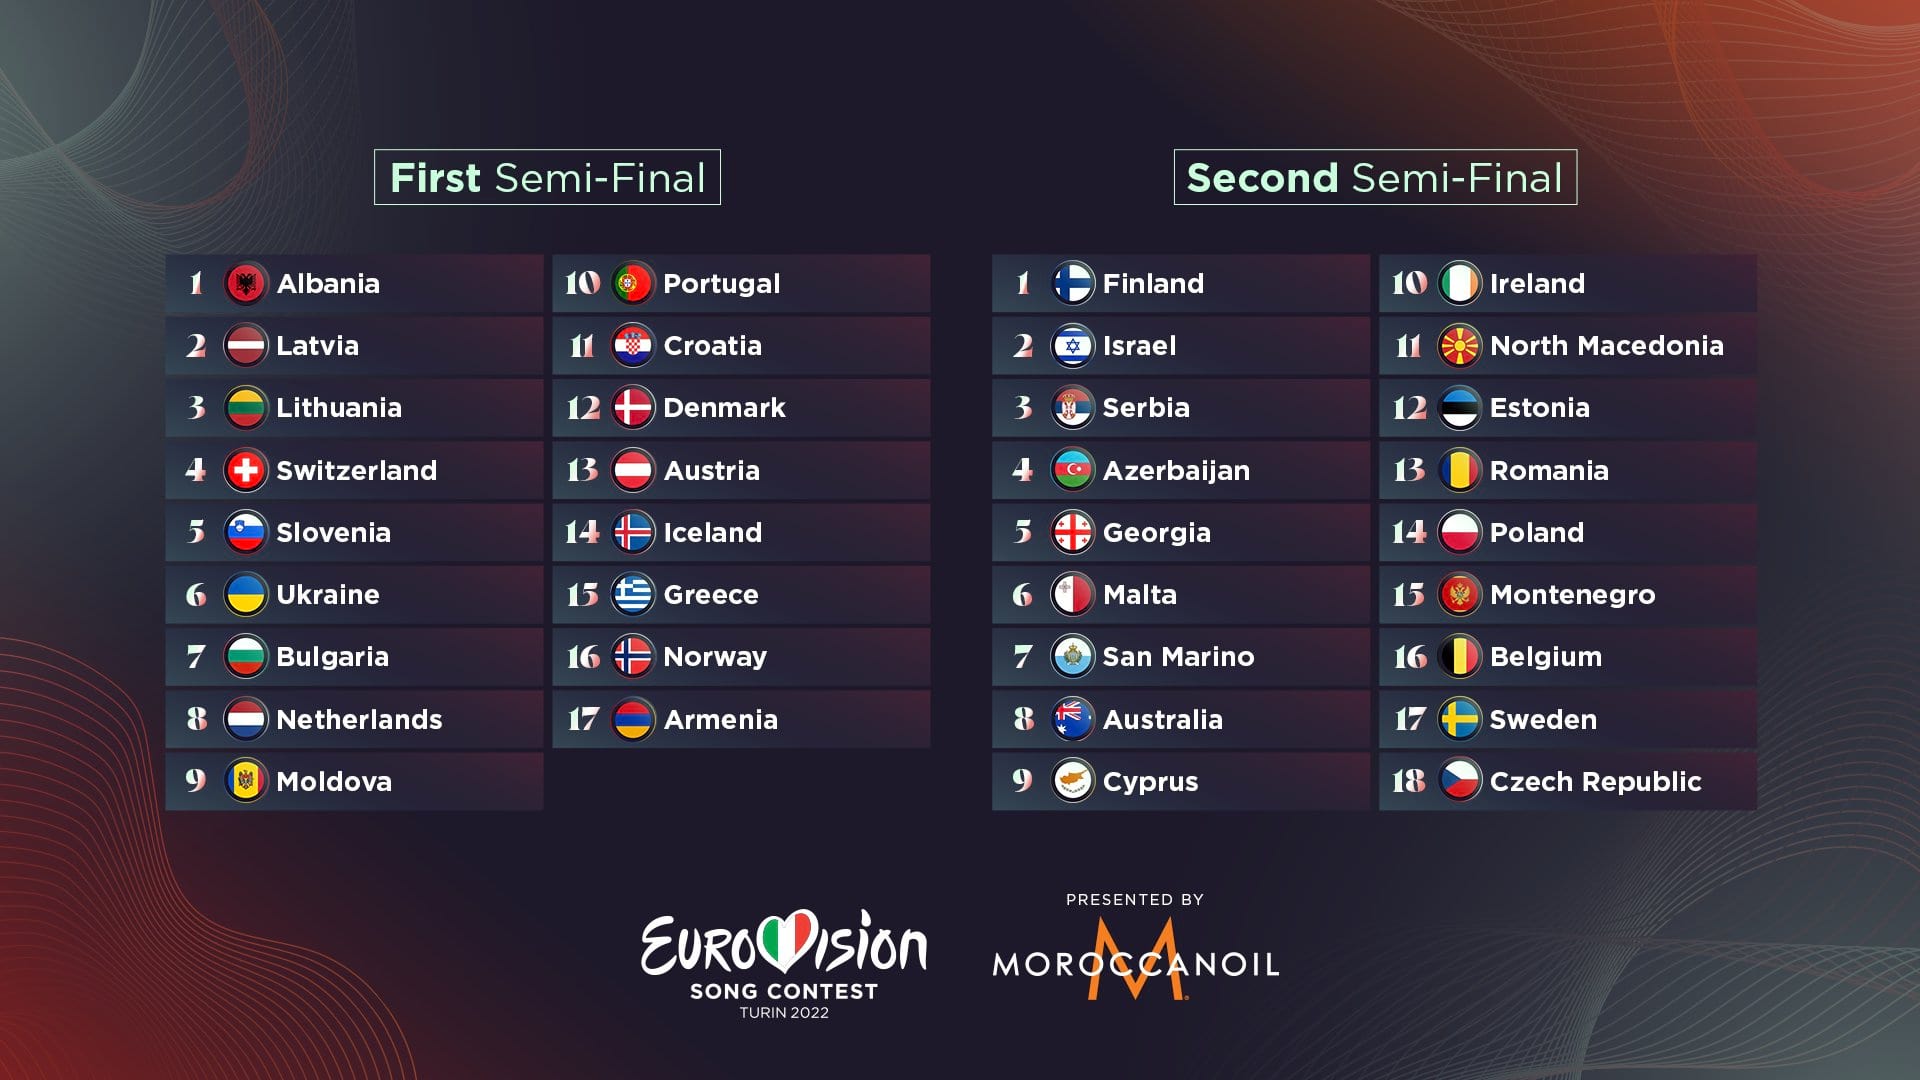 Eurovision 2022 Semifinals running order unveiled